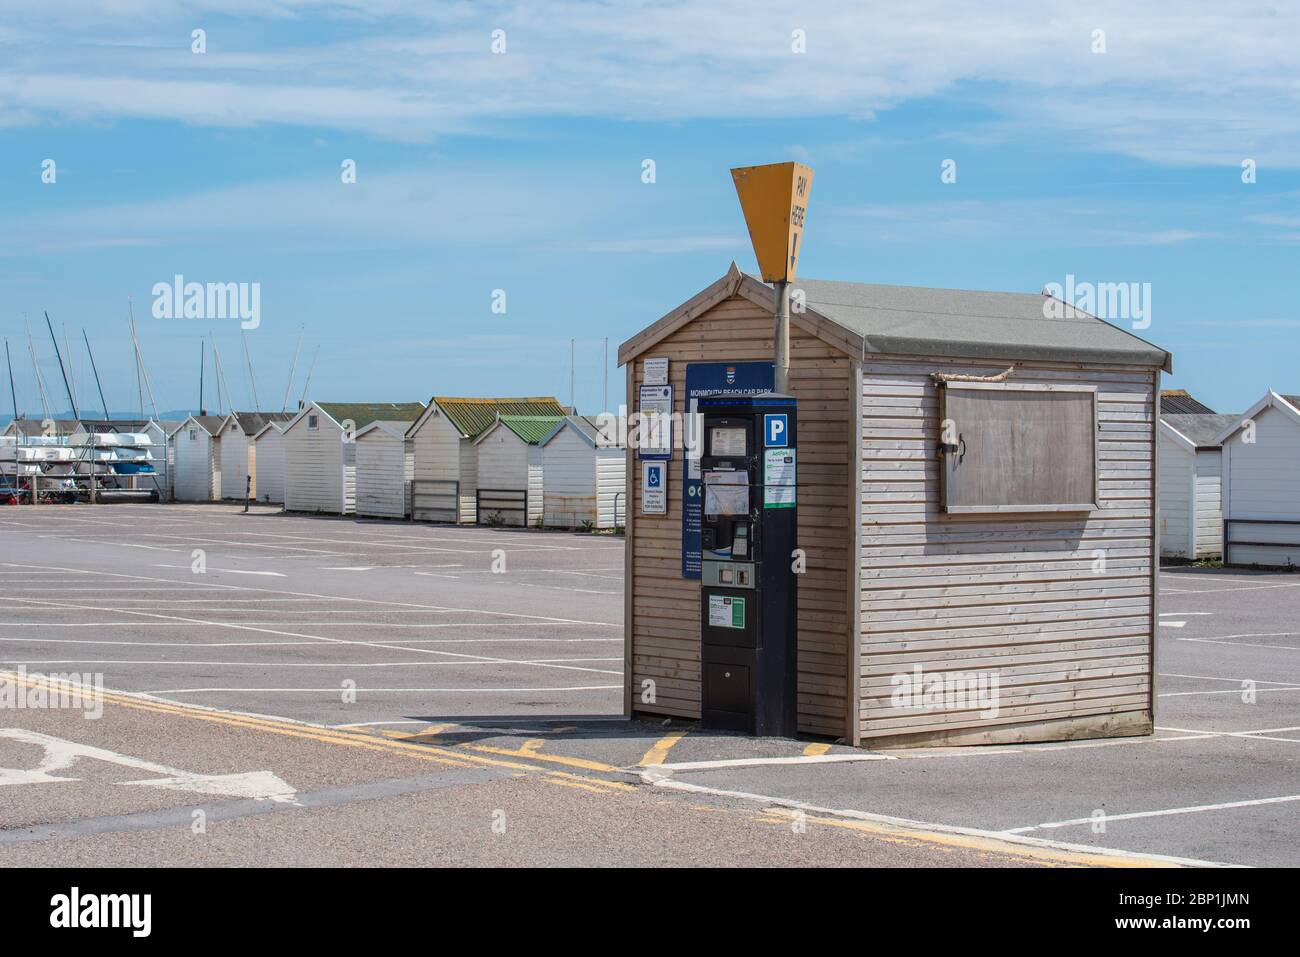 Lyme Regis, Dorset, UK. 17th May, 2020. UK Weather: A lovely warm and sunny afternoon at the seaside resort of Lyme Regis. Dorset Council operated car park at Monmouth Beach carpark remains firmly closed as visitors from outside the region are urged to 'stay away and visit later'. Credit: Celia McMahon/Alamy Live News Stock Photo